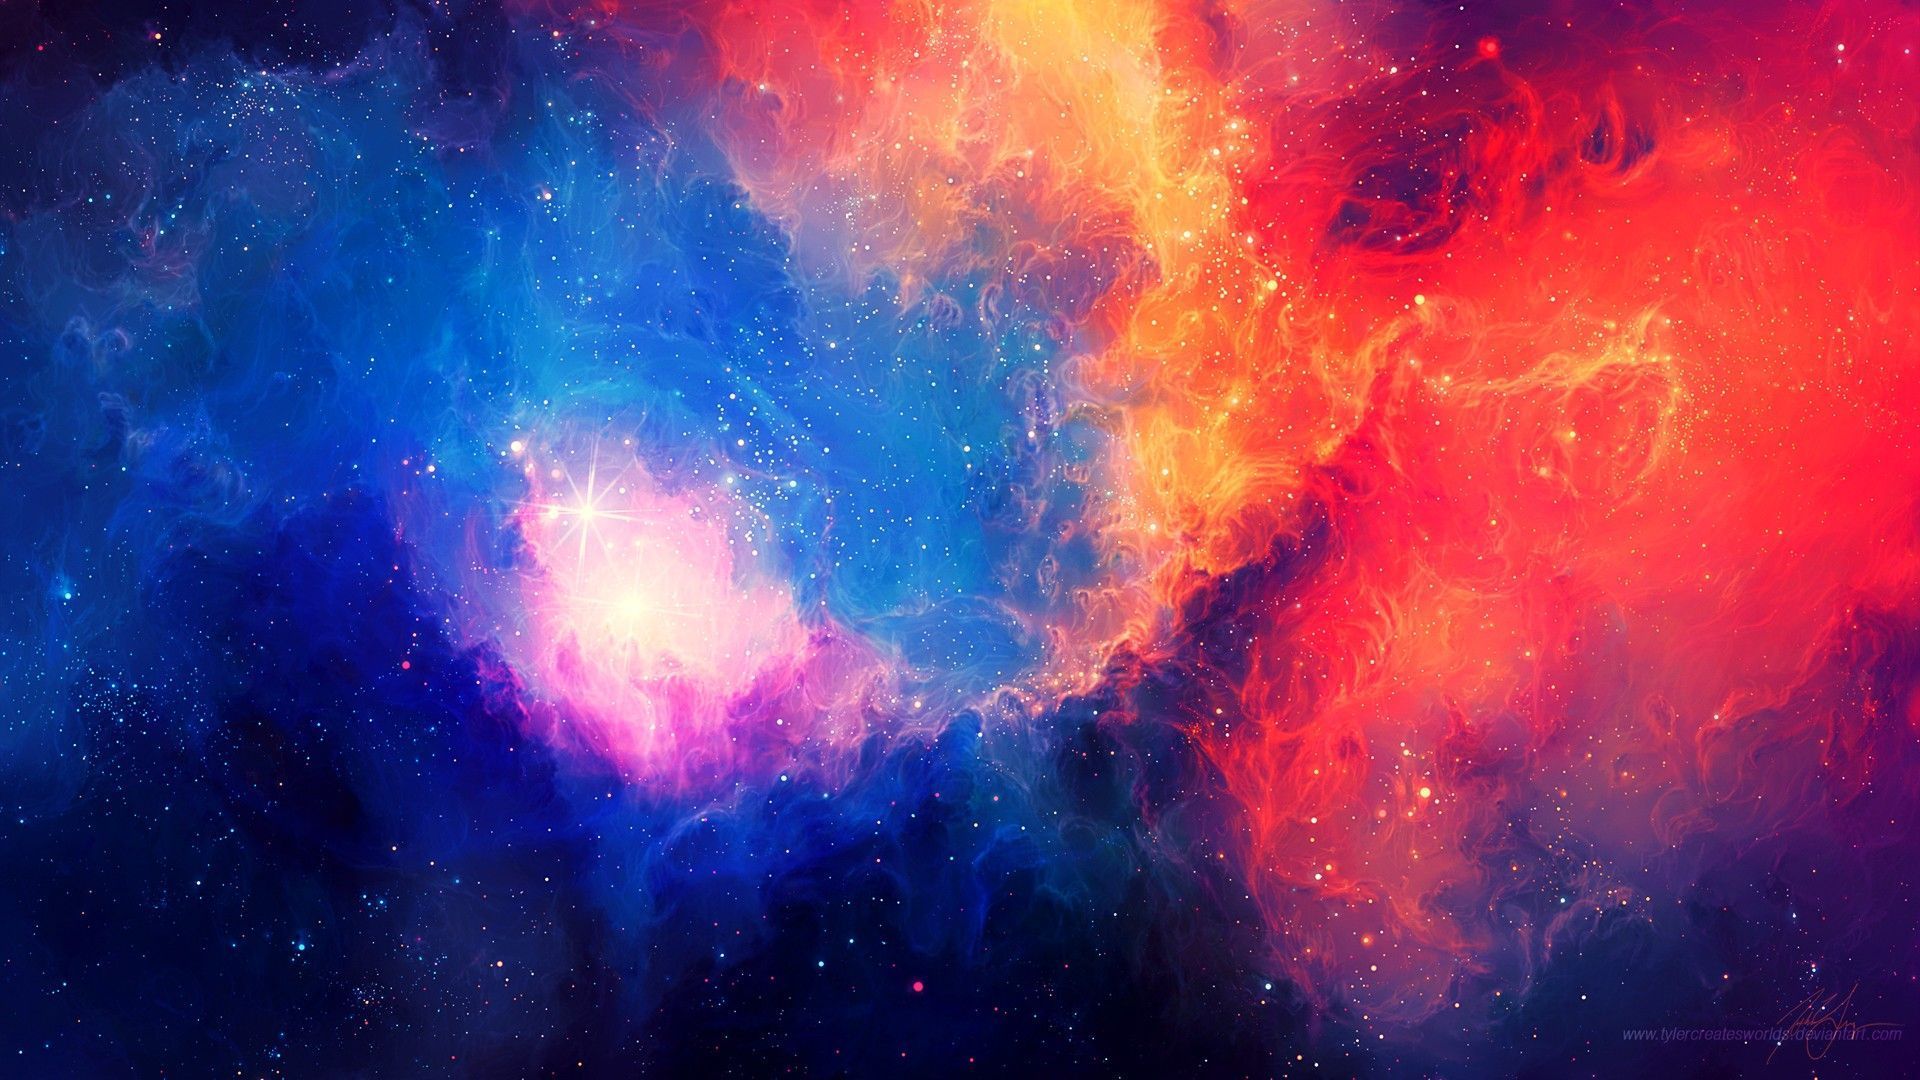 Download Colorful Galaxy Wallpaper Images #aDWHo wallpincuk.com